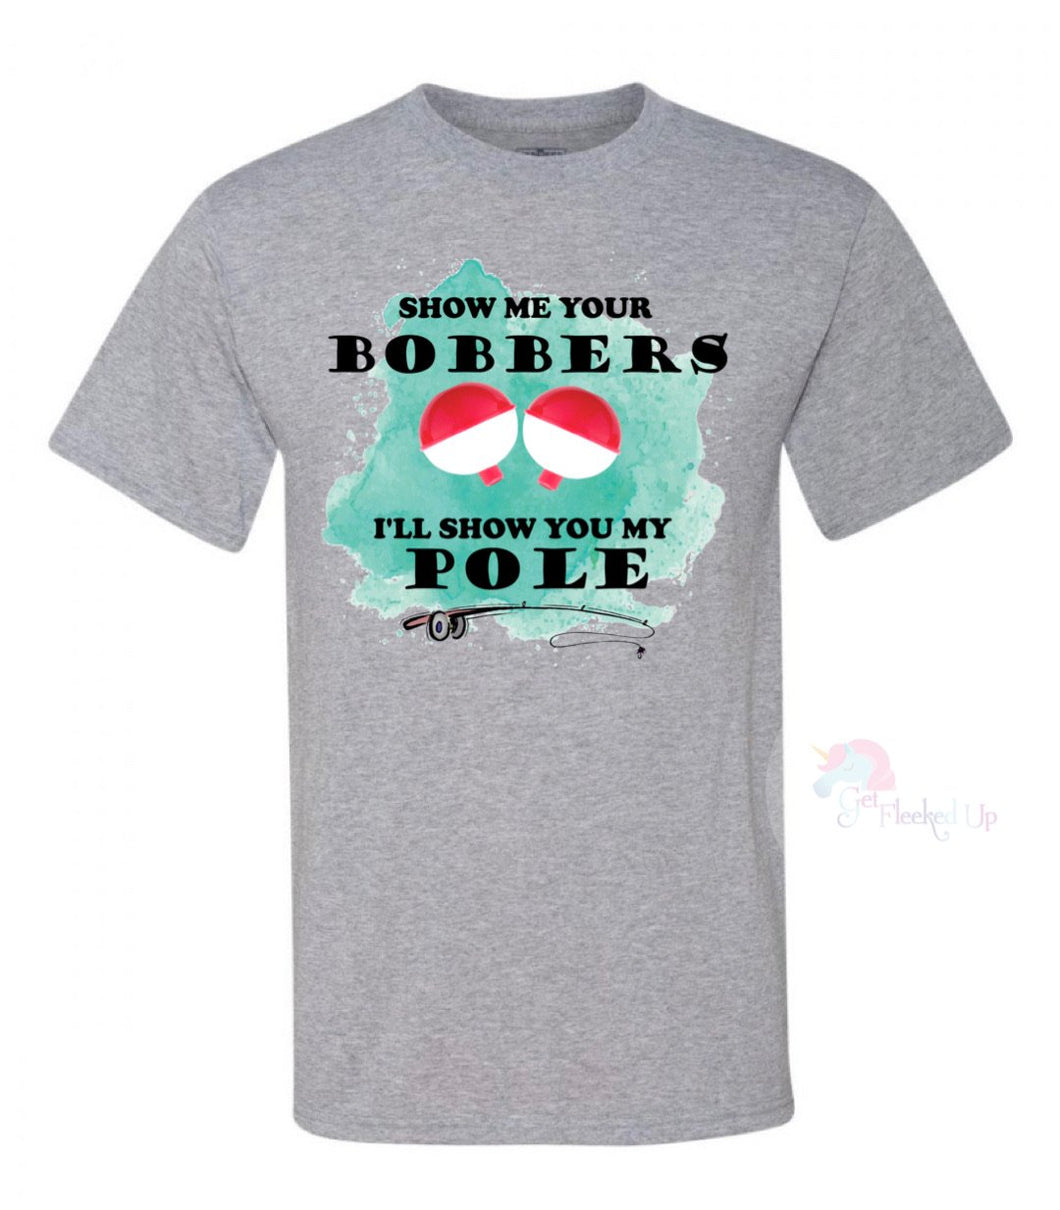 Show me your bobbers I’ll show you my pole shirt - Get Fleeked Up